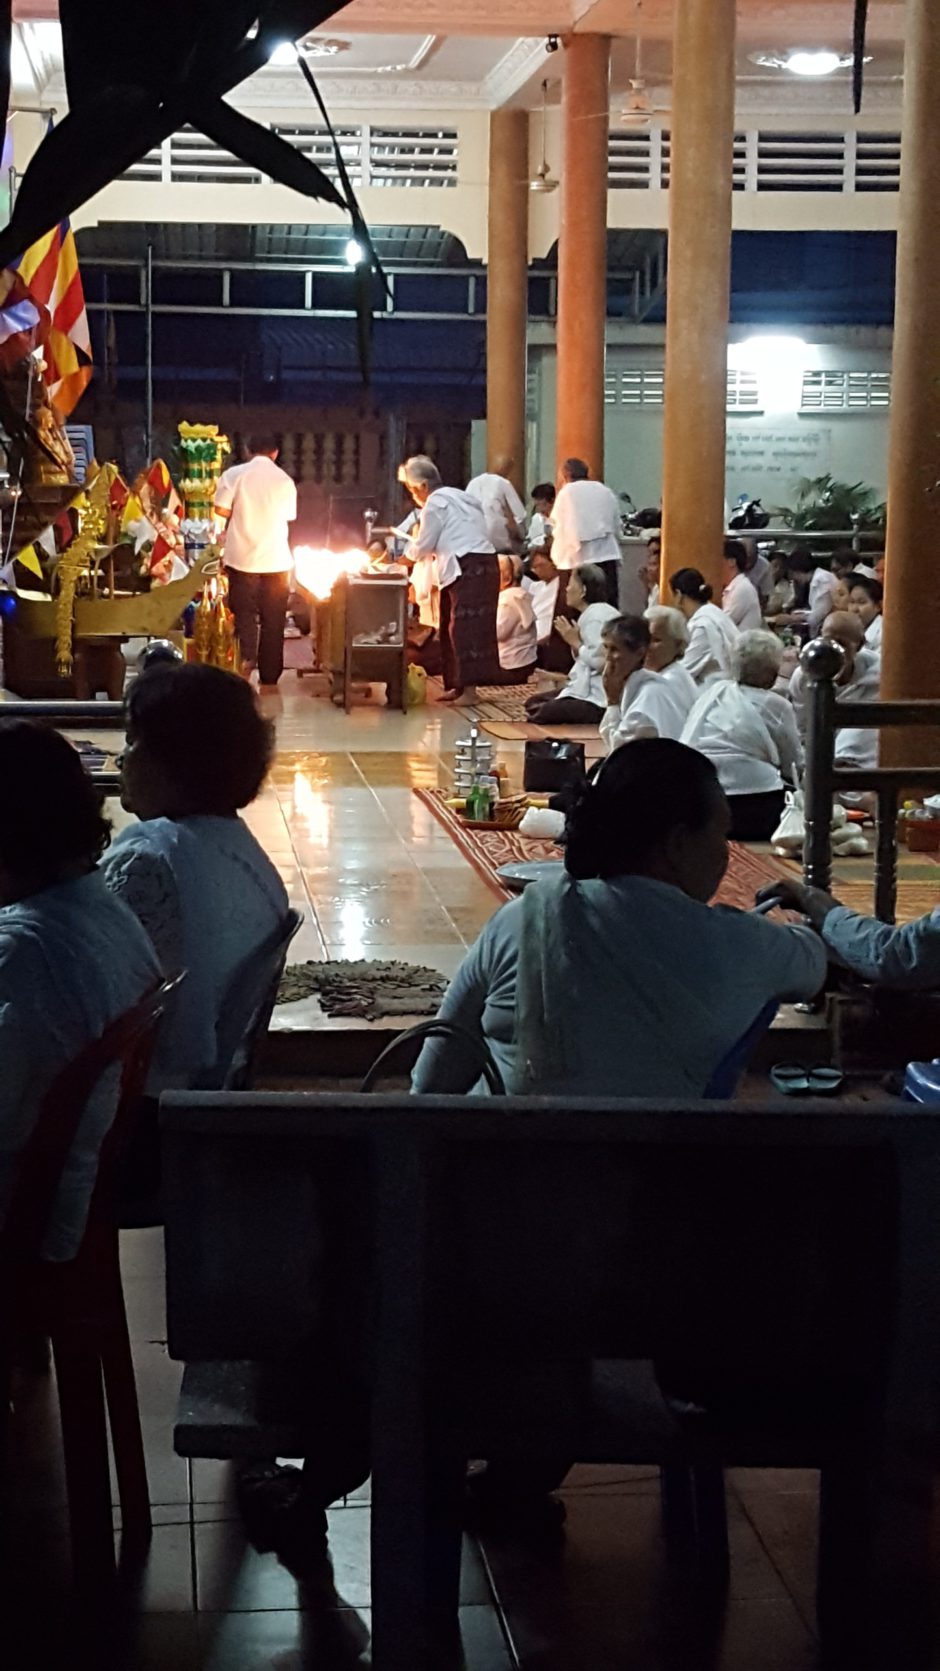 Old people in cambodia go to pagoda